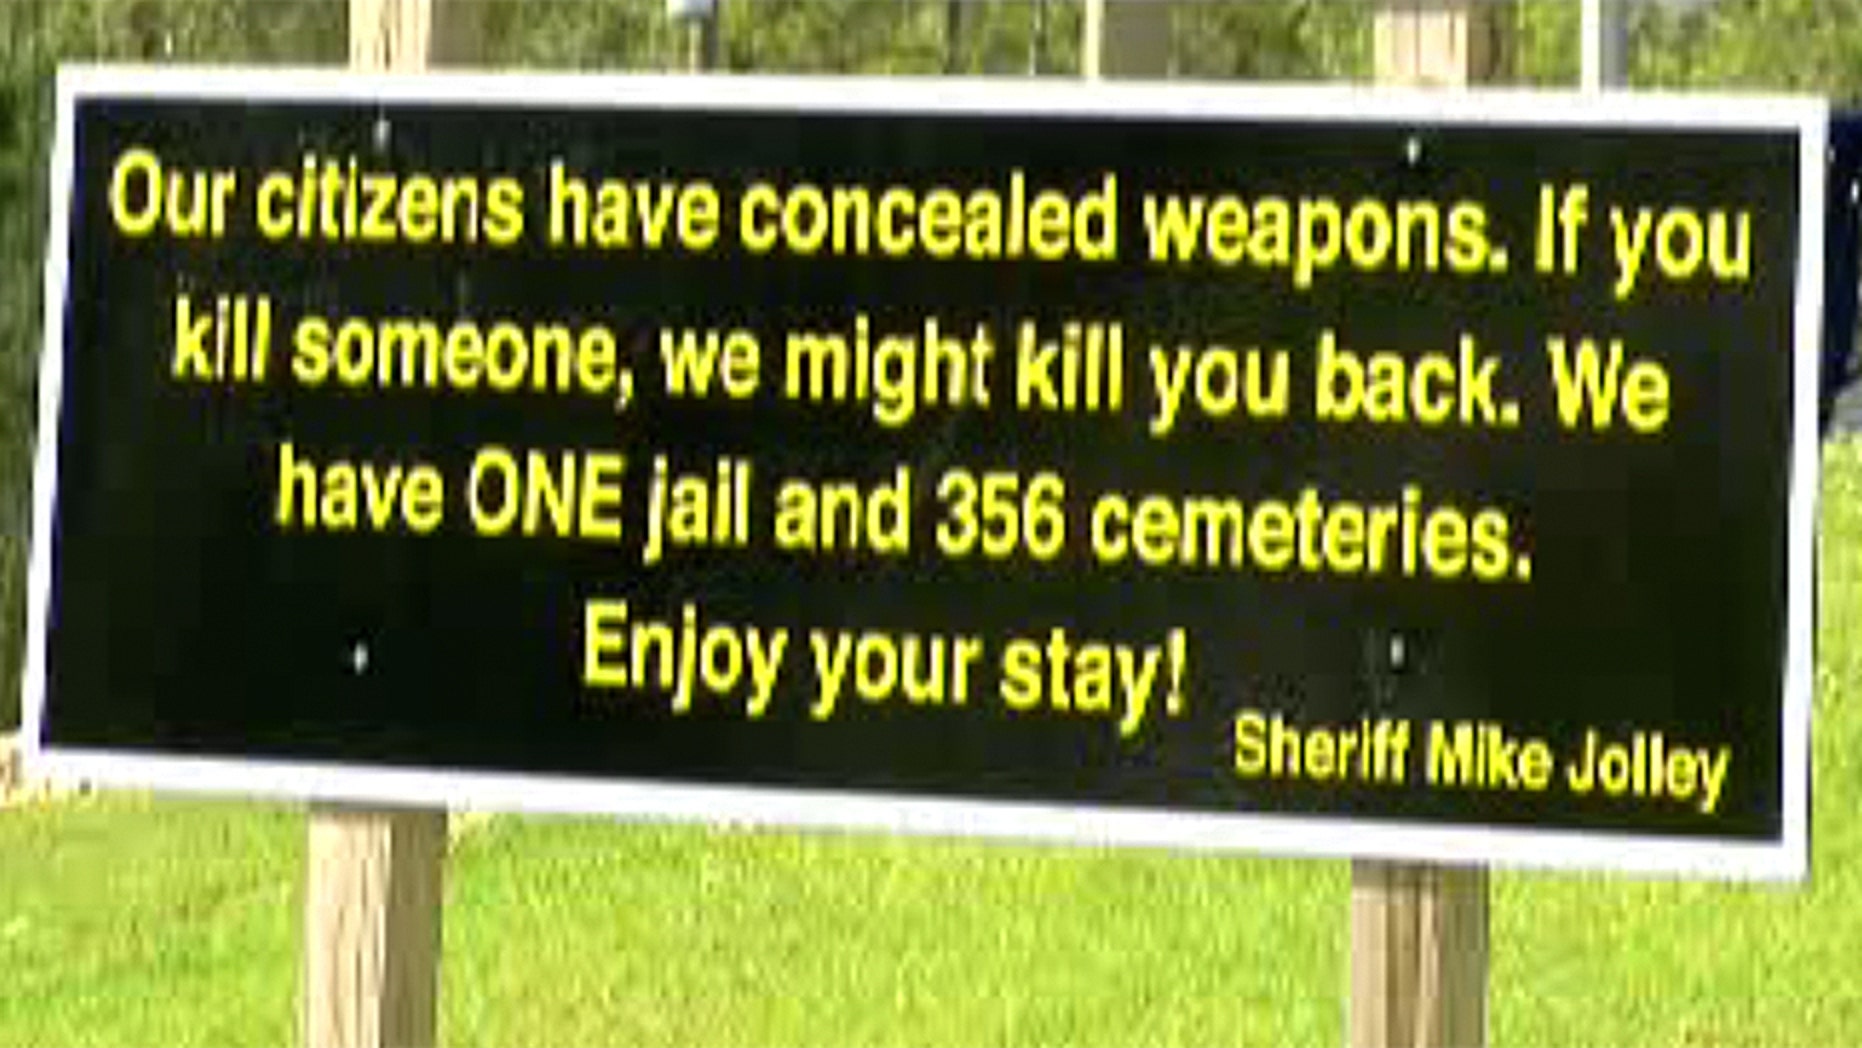 Sheriff Mike Jolley's new sign has gone viral for its concealed carry message to visitors.